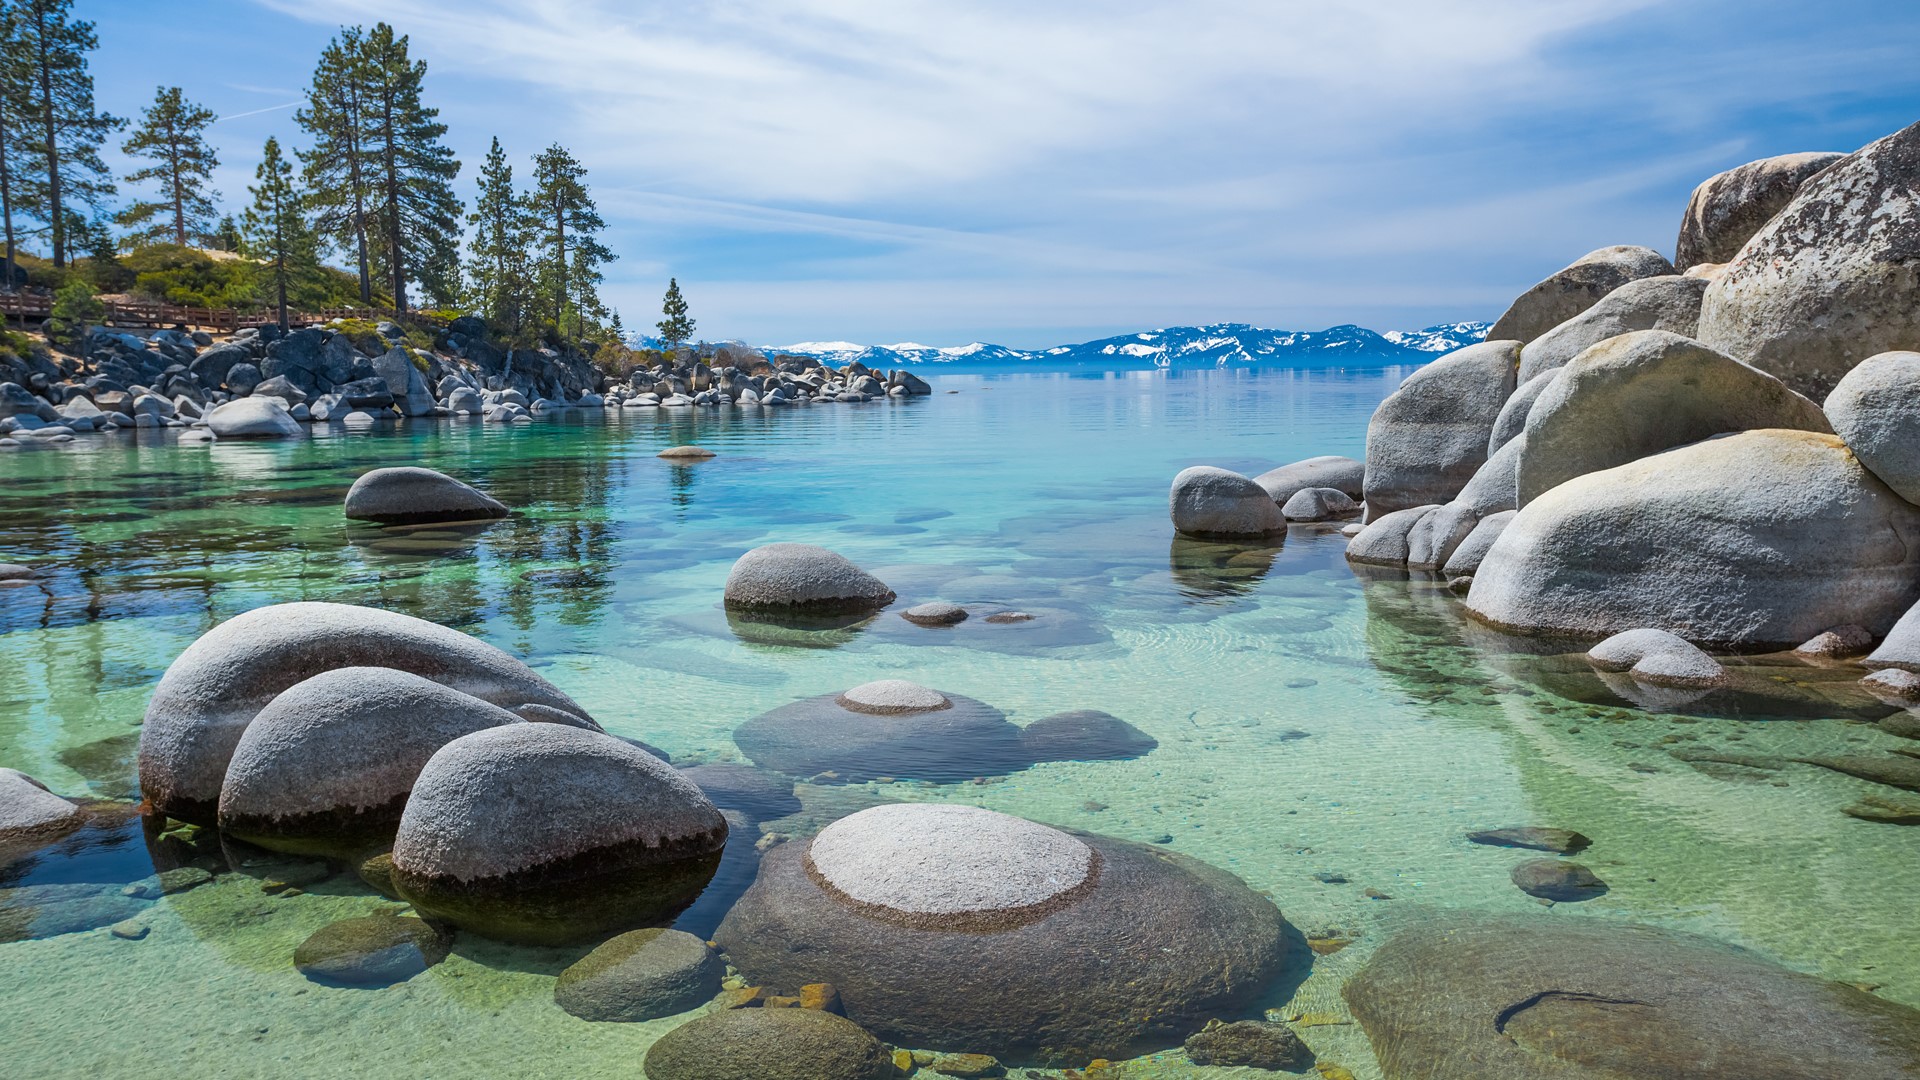 General 1920x1080 nature landscape lake trees rocks clear water water ripples mountains clouds sky snowy mountain Lake Tahoe Nevada USA